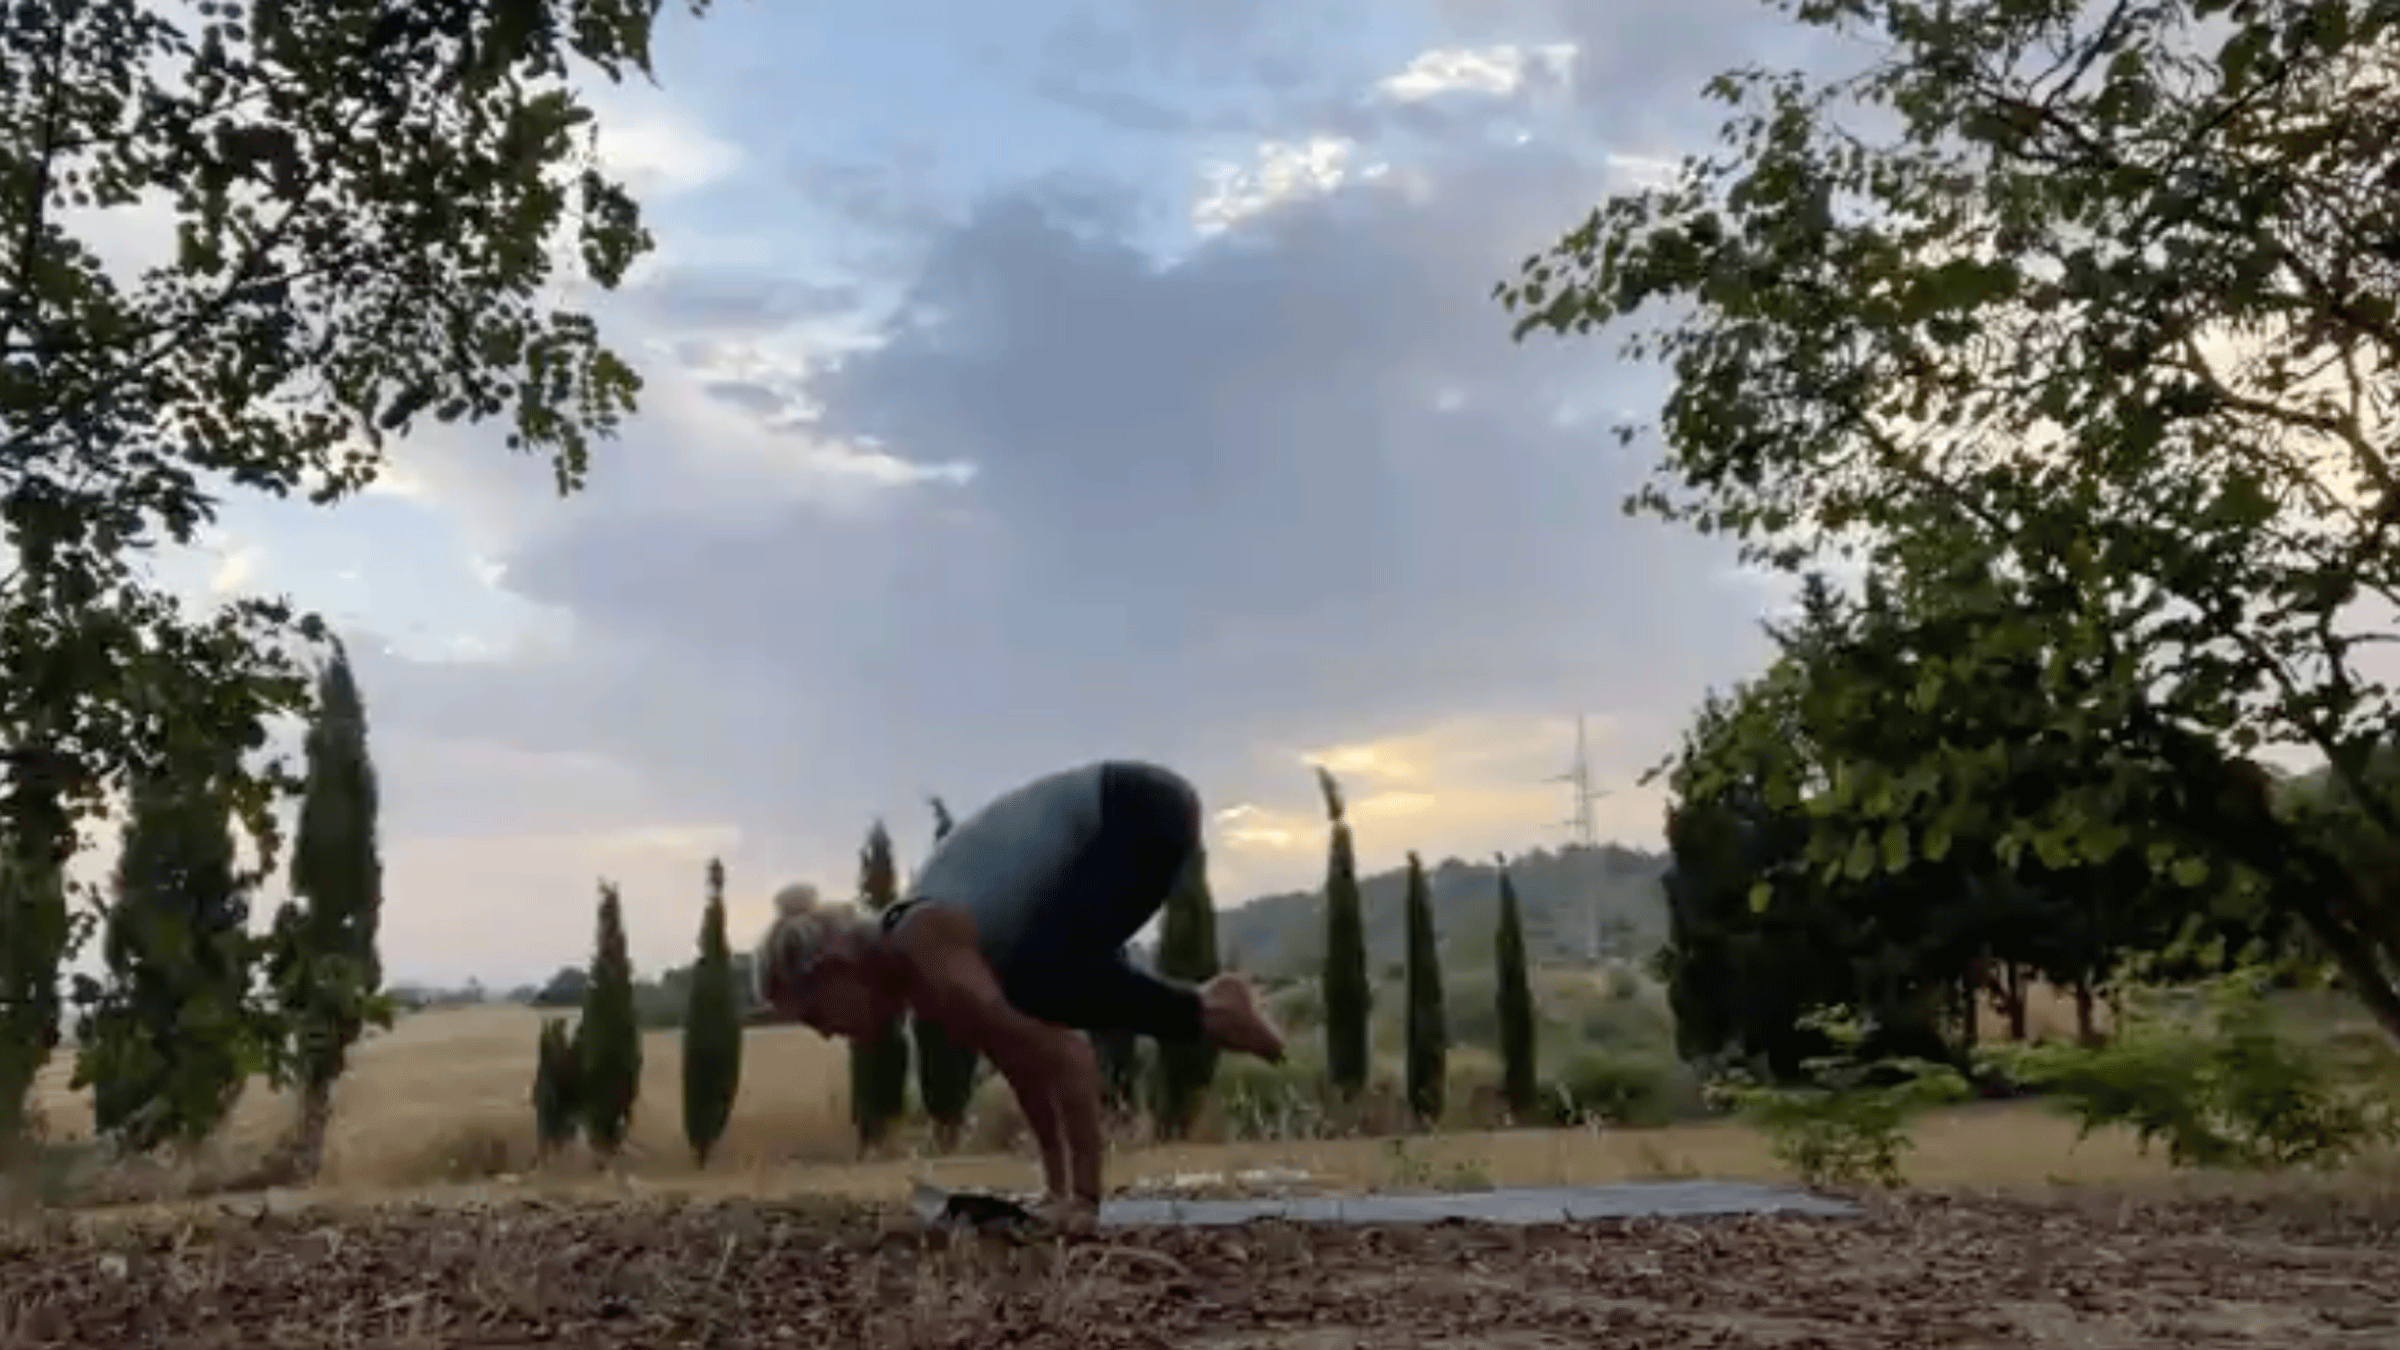 A Morning Yoga Routine That Moves You in All the Ways You Need